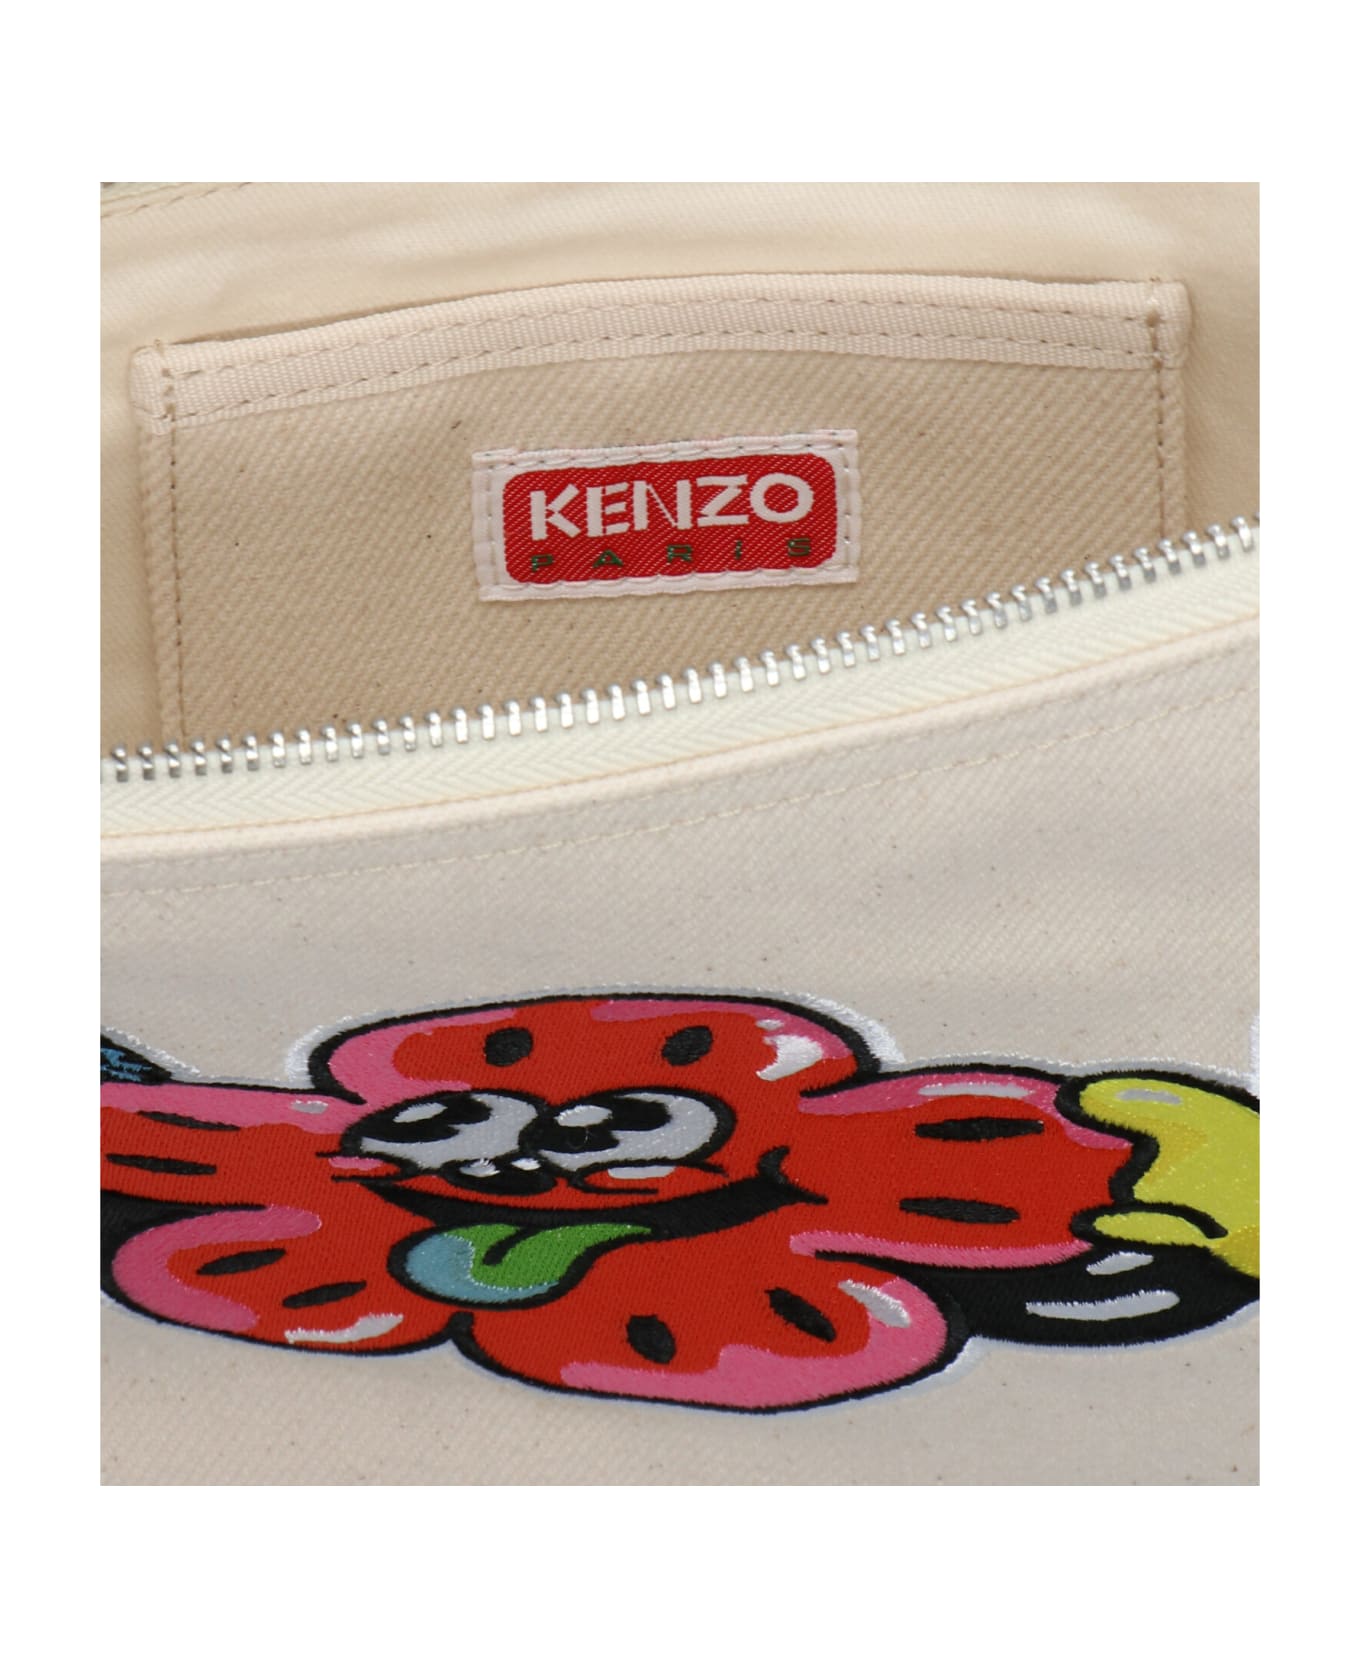 Kenzo Embroidered Clutch - Beige クラッチバッグ